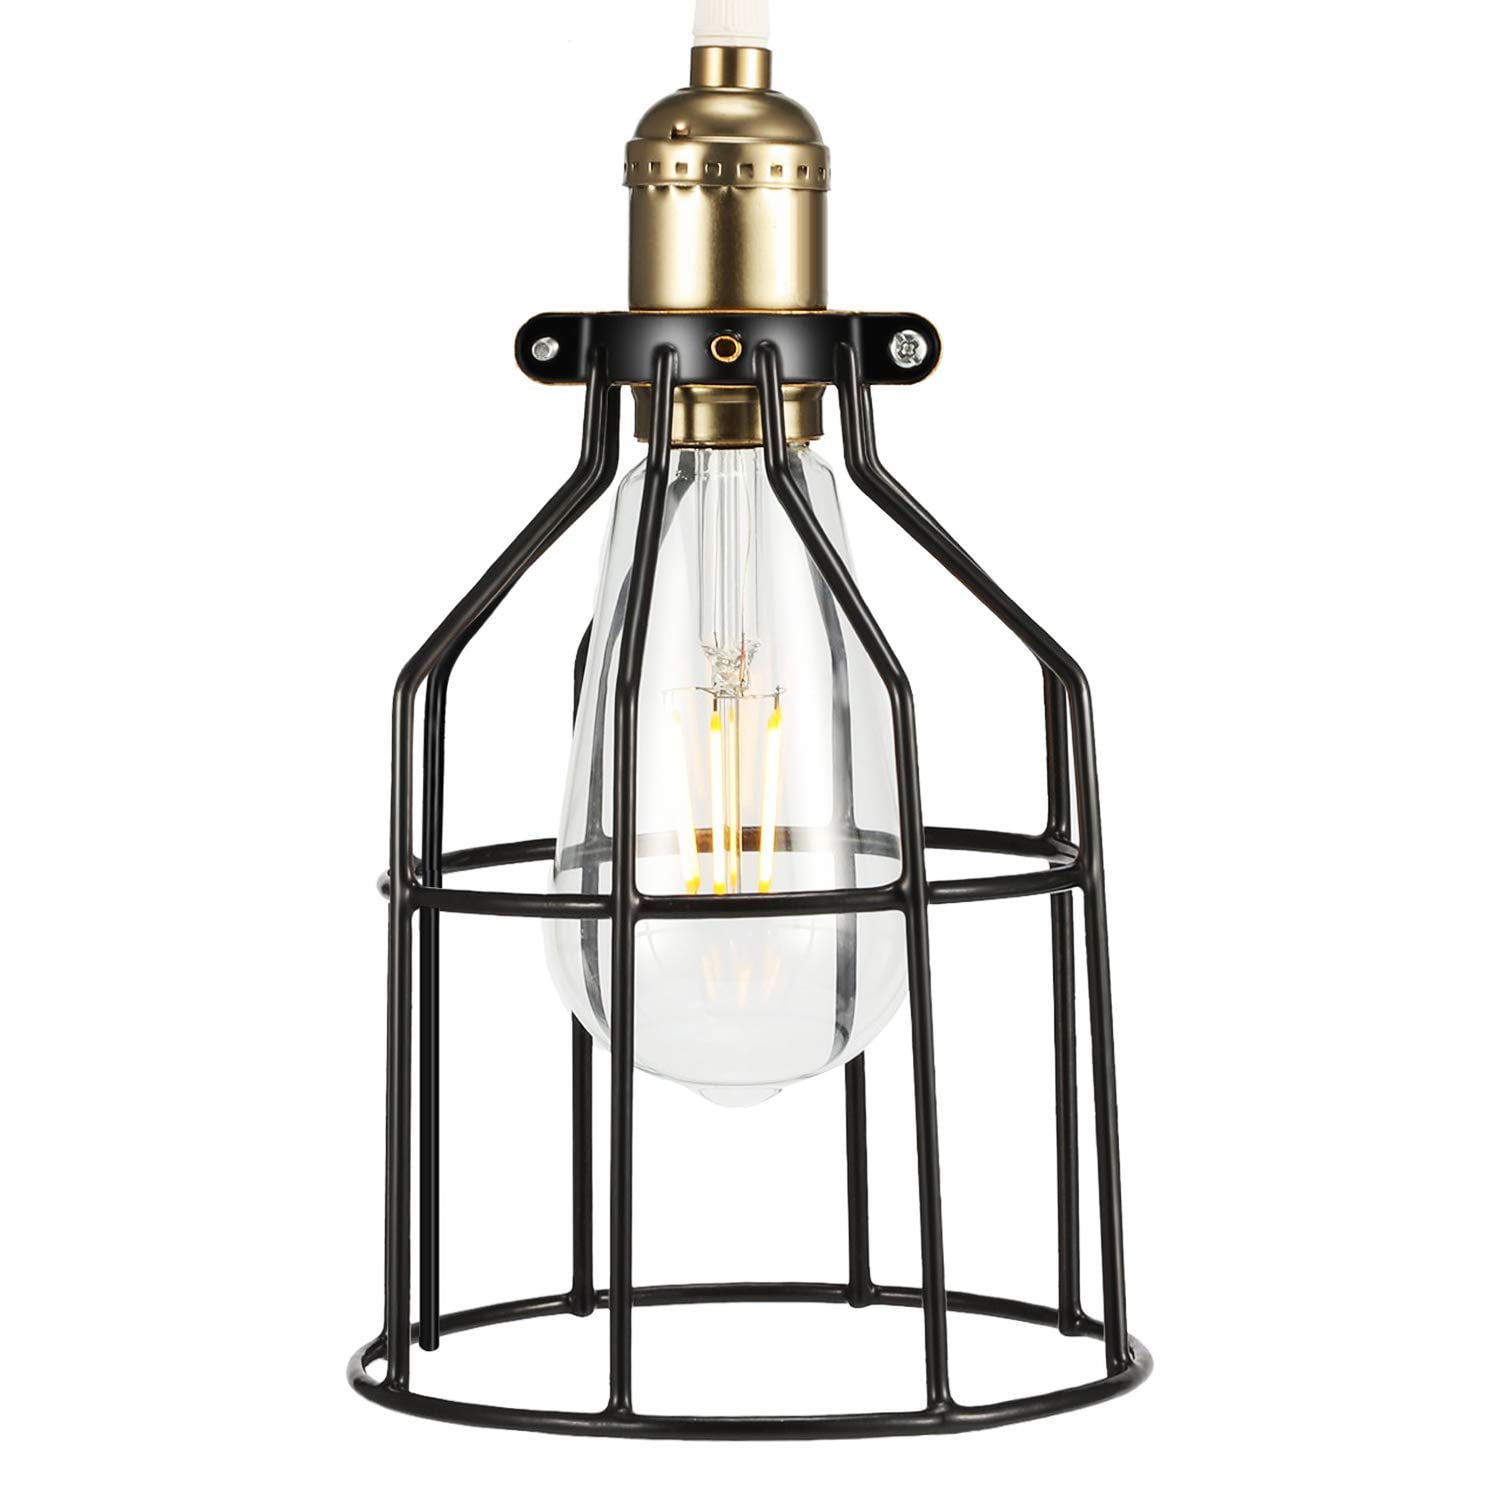 Details about   Bronze Finish Metal Steel Bulb Cage Industrial Lights Pendant Lamp Guard 10518J